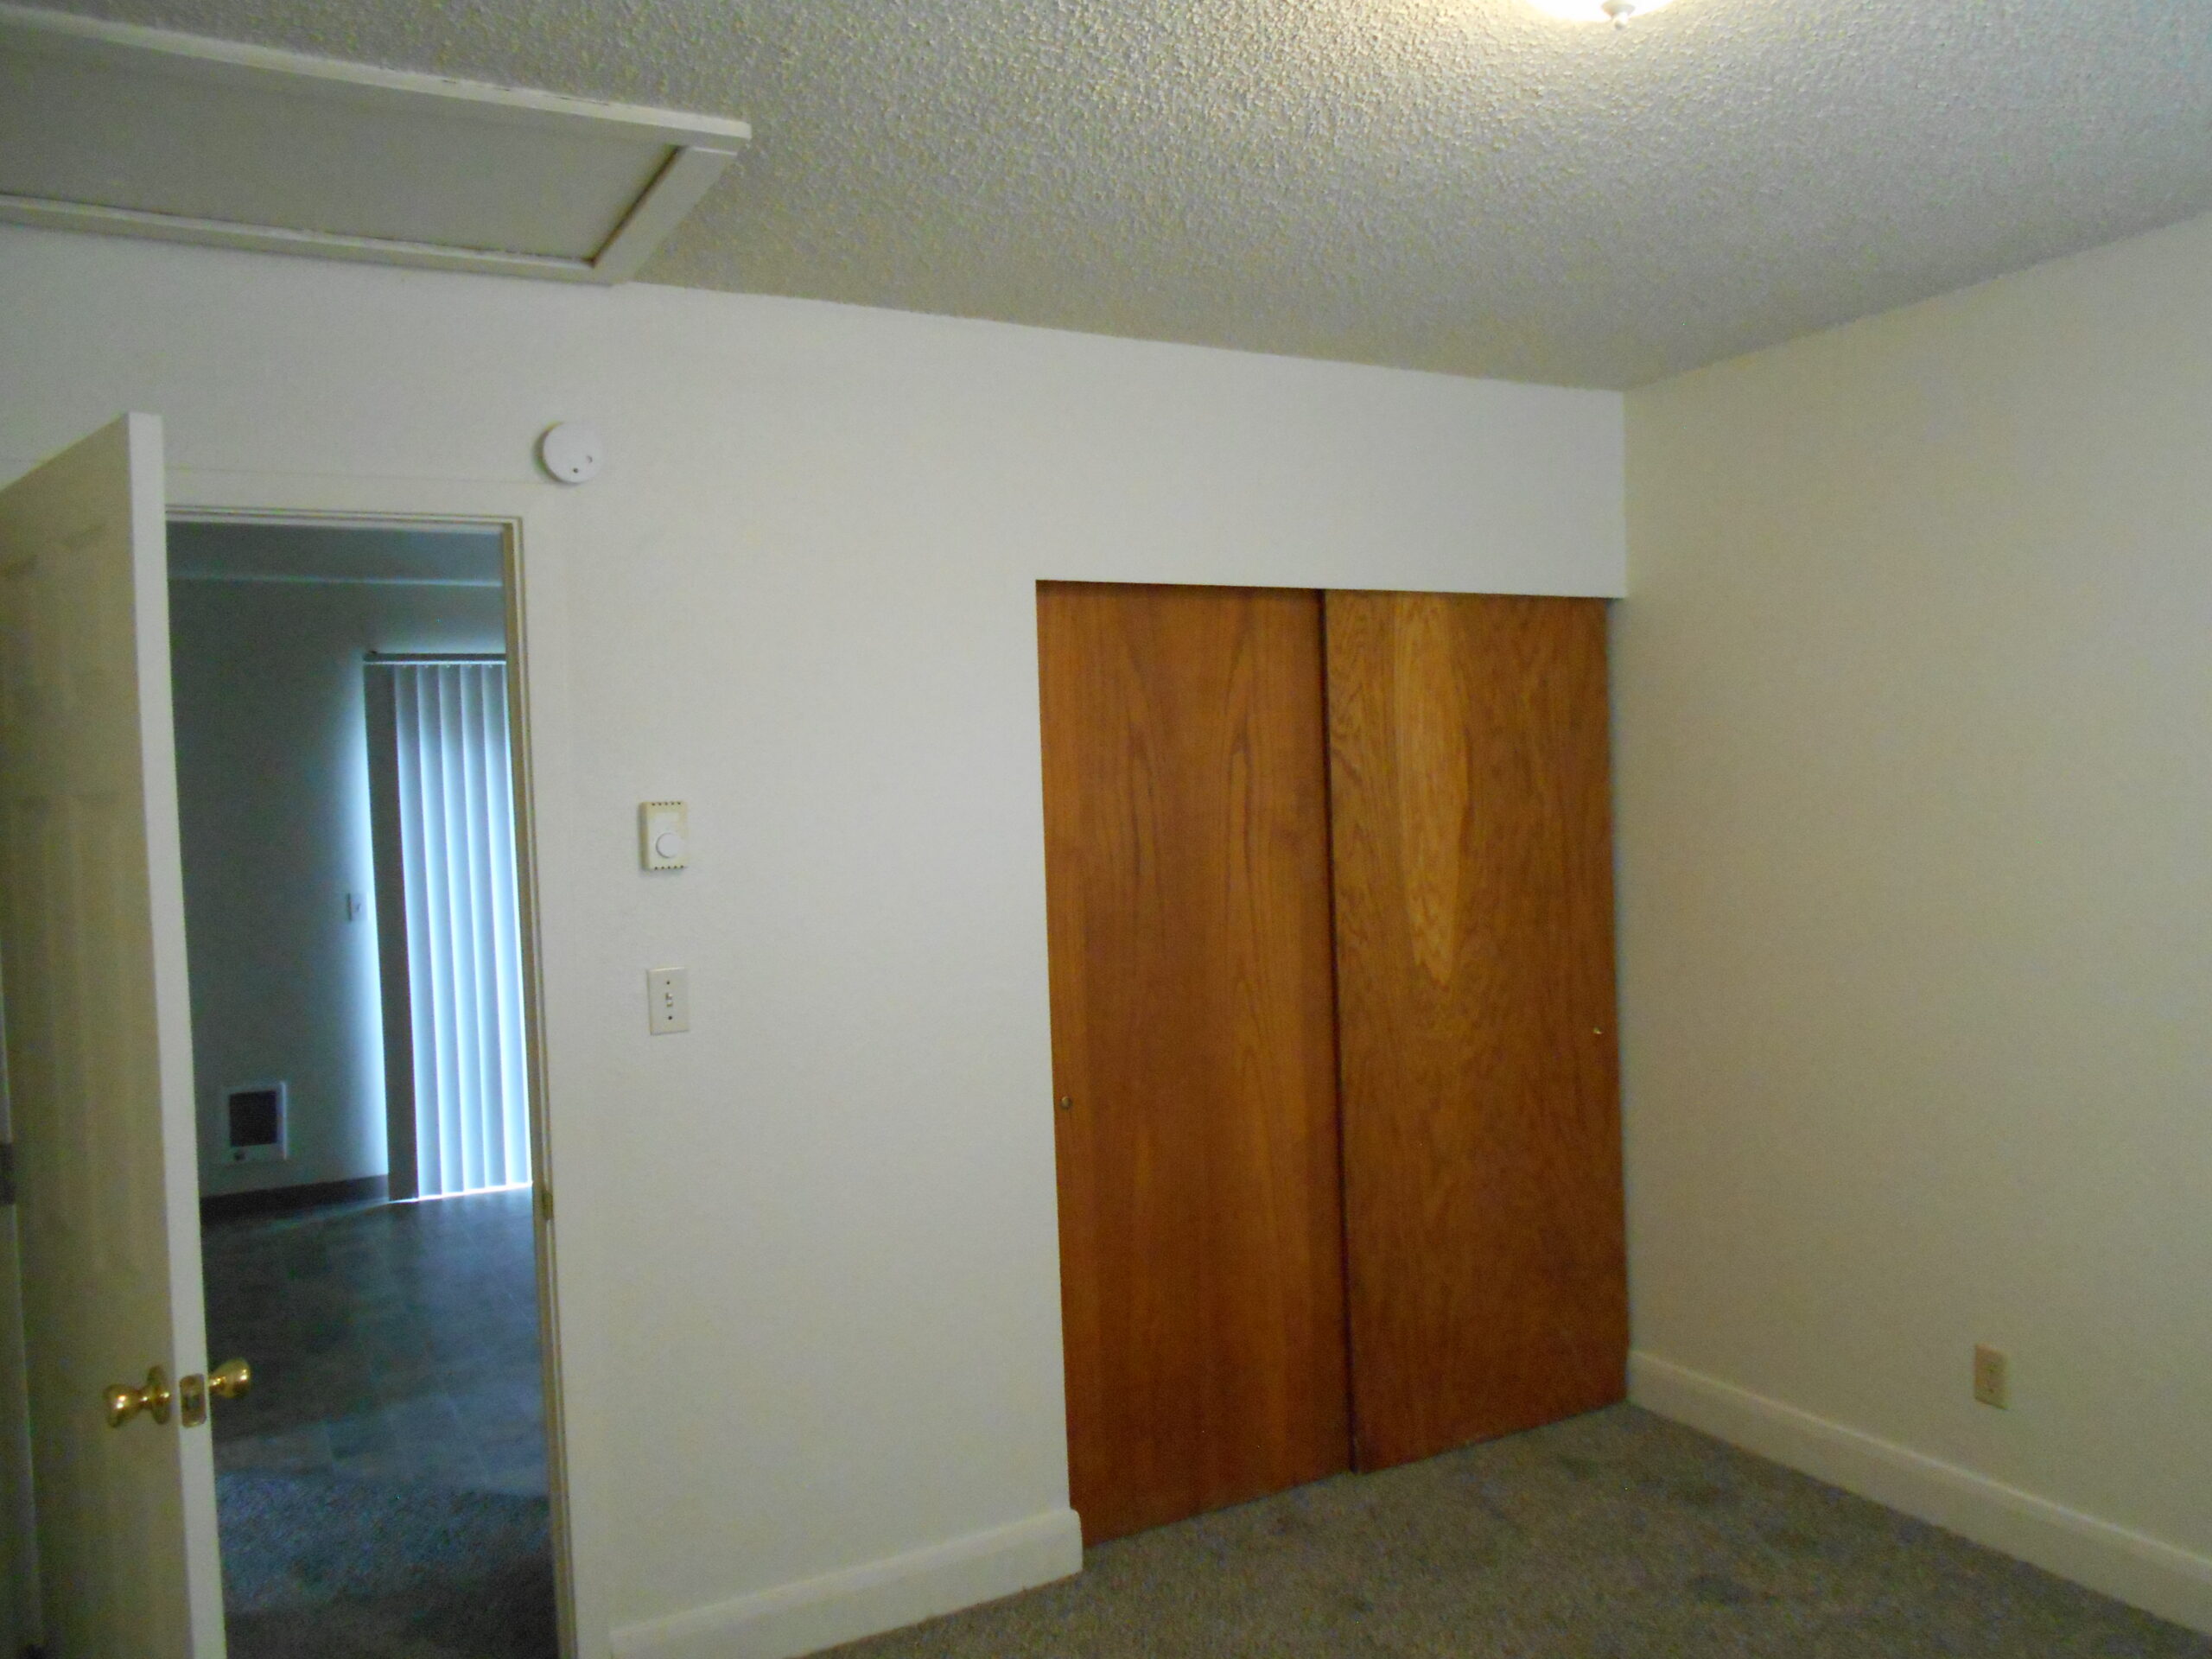 $1,195 – 1 Bedroom Duplex in Tacoma with FREE* APPLICATION FEES!!!